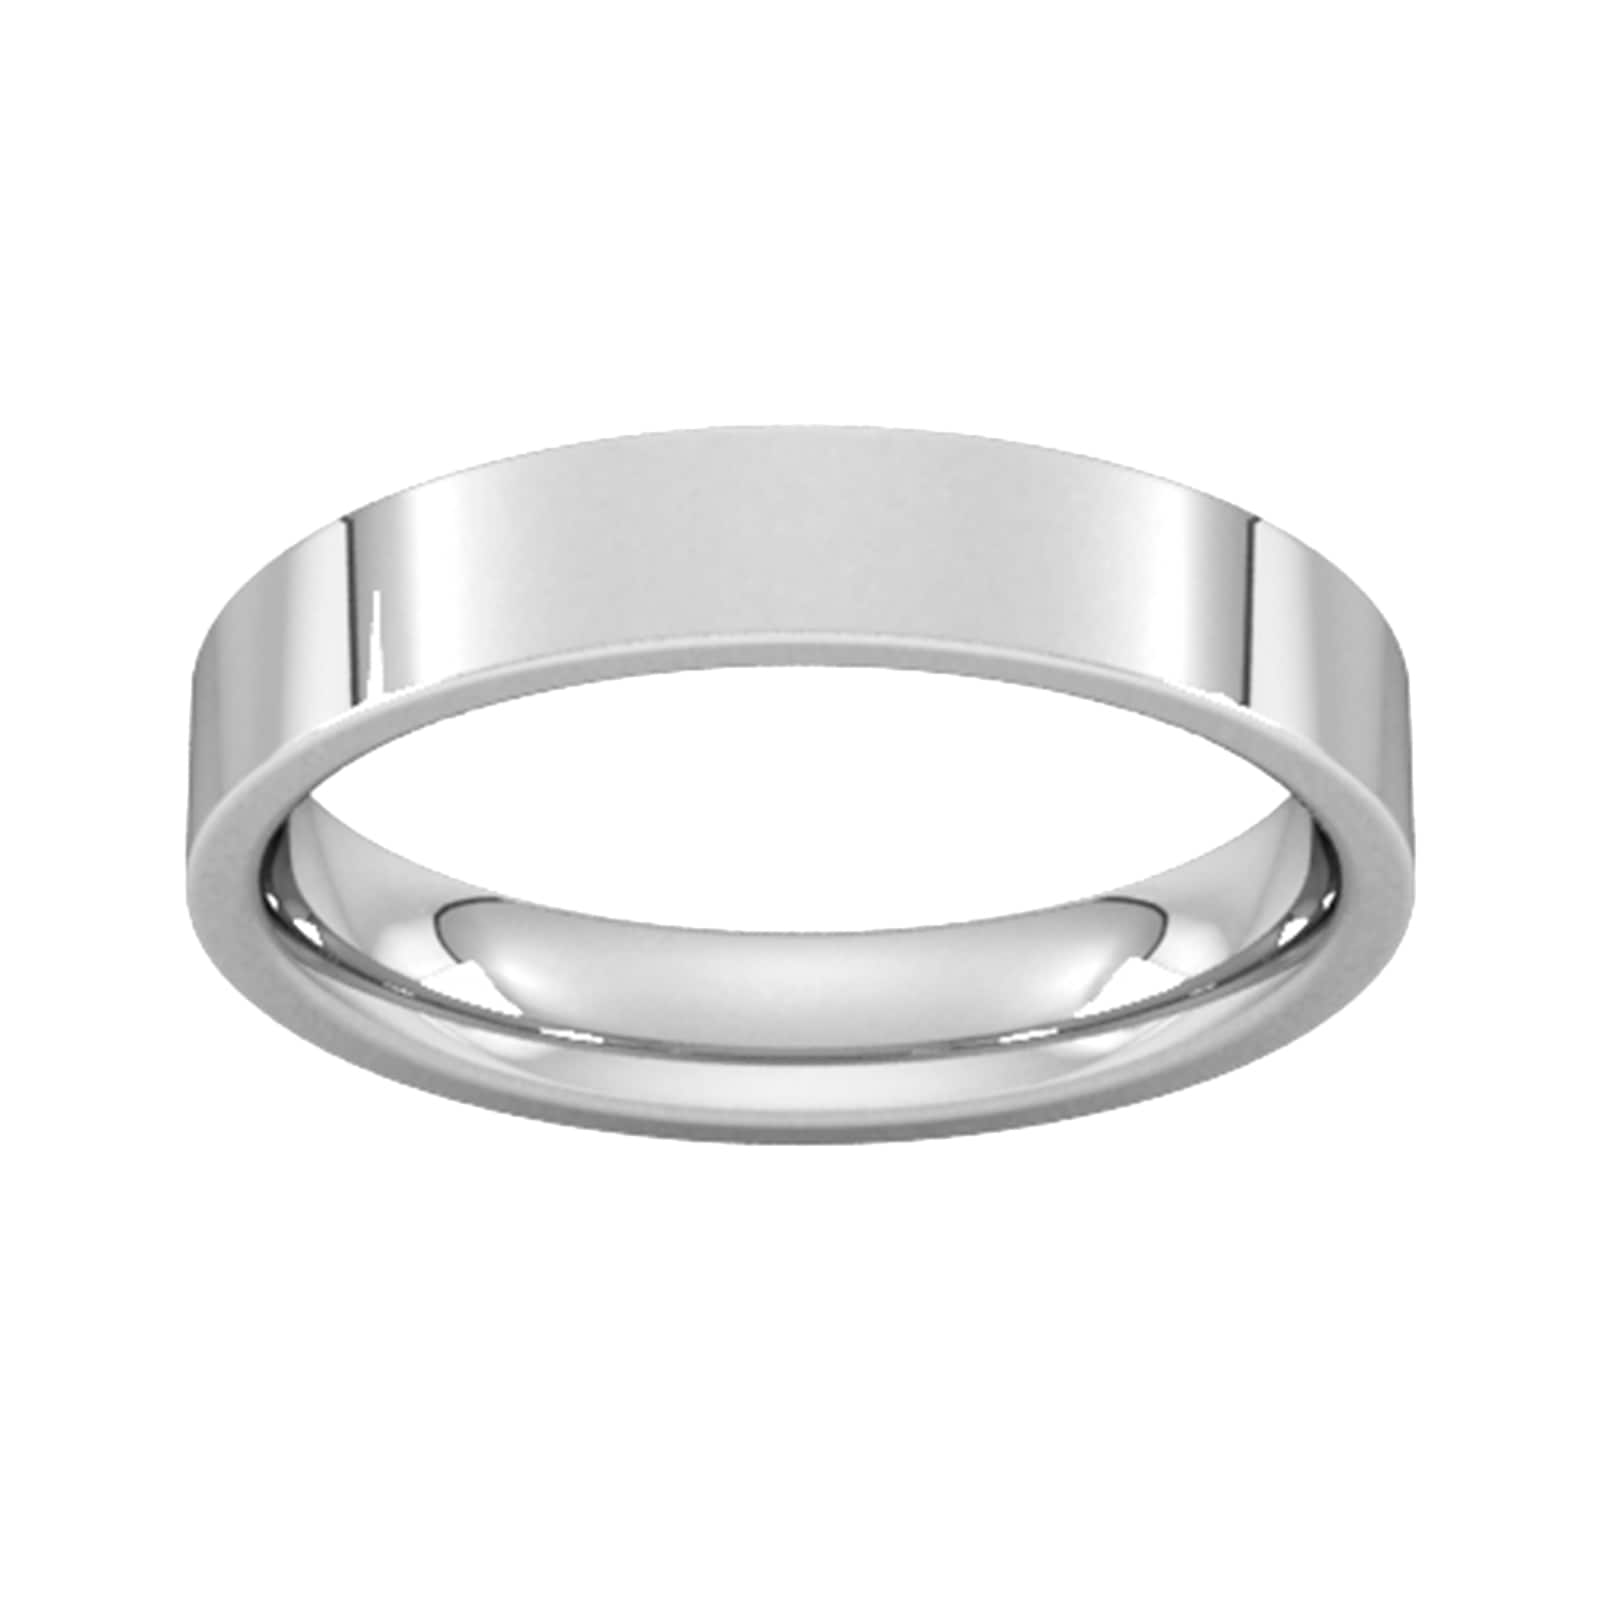 4mm Flat Court Heavy Wedding Ring In Sterling Silver - Ring Size S